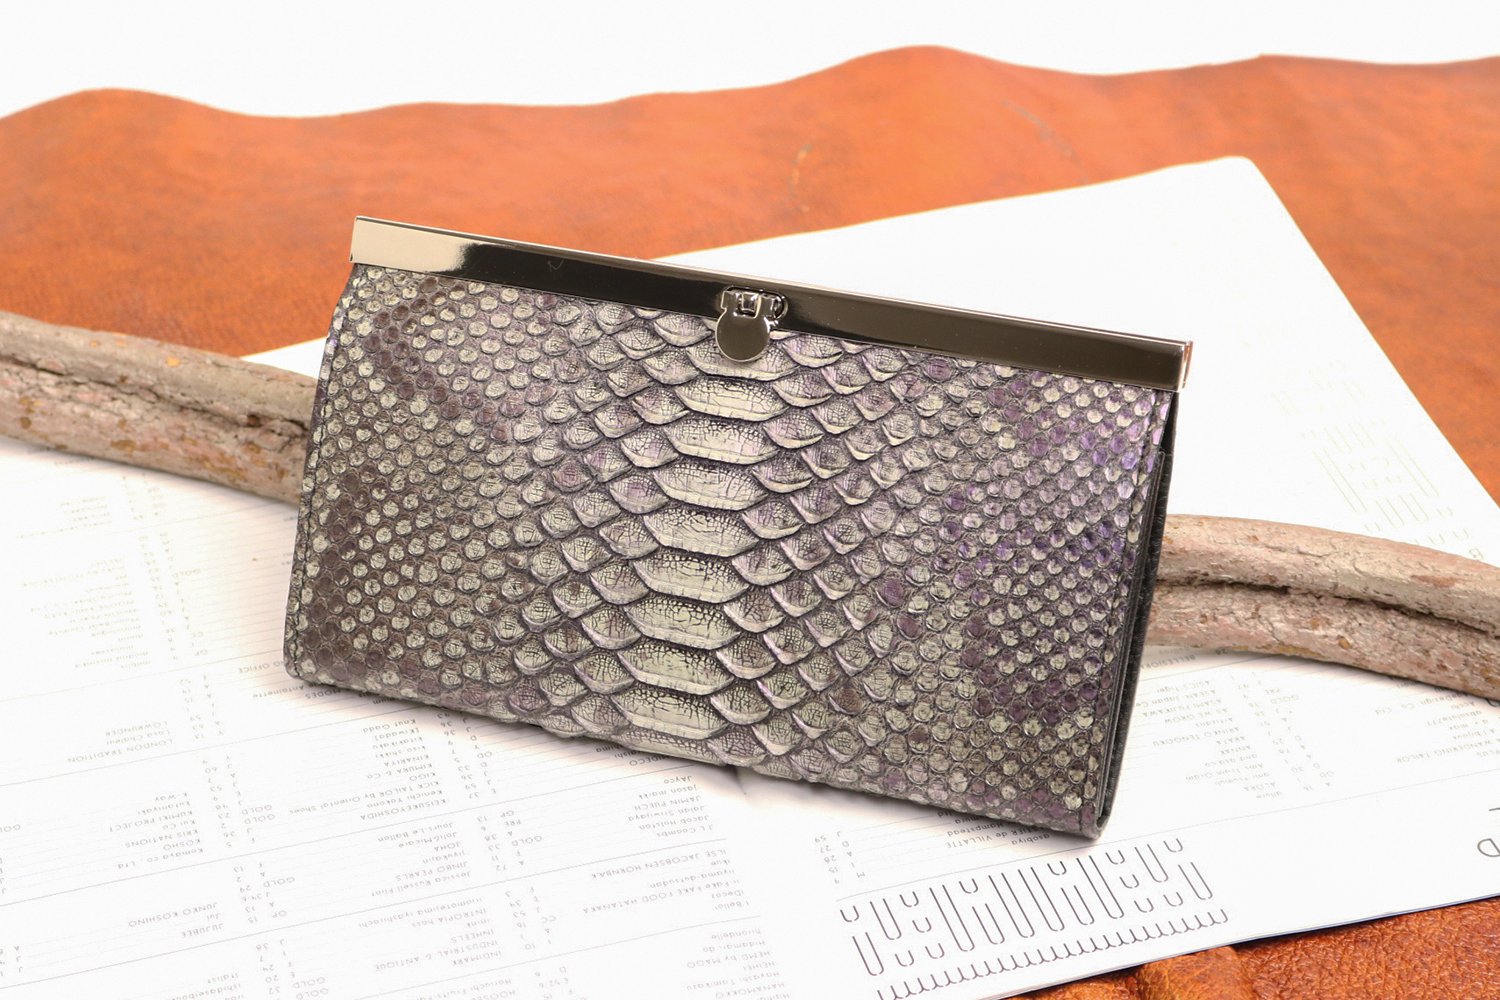 FU-SI FERNALLE / Pearl Python wallet collection Beautiful Japanese Python bellows long wallet